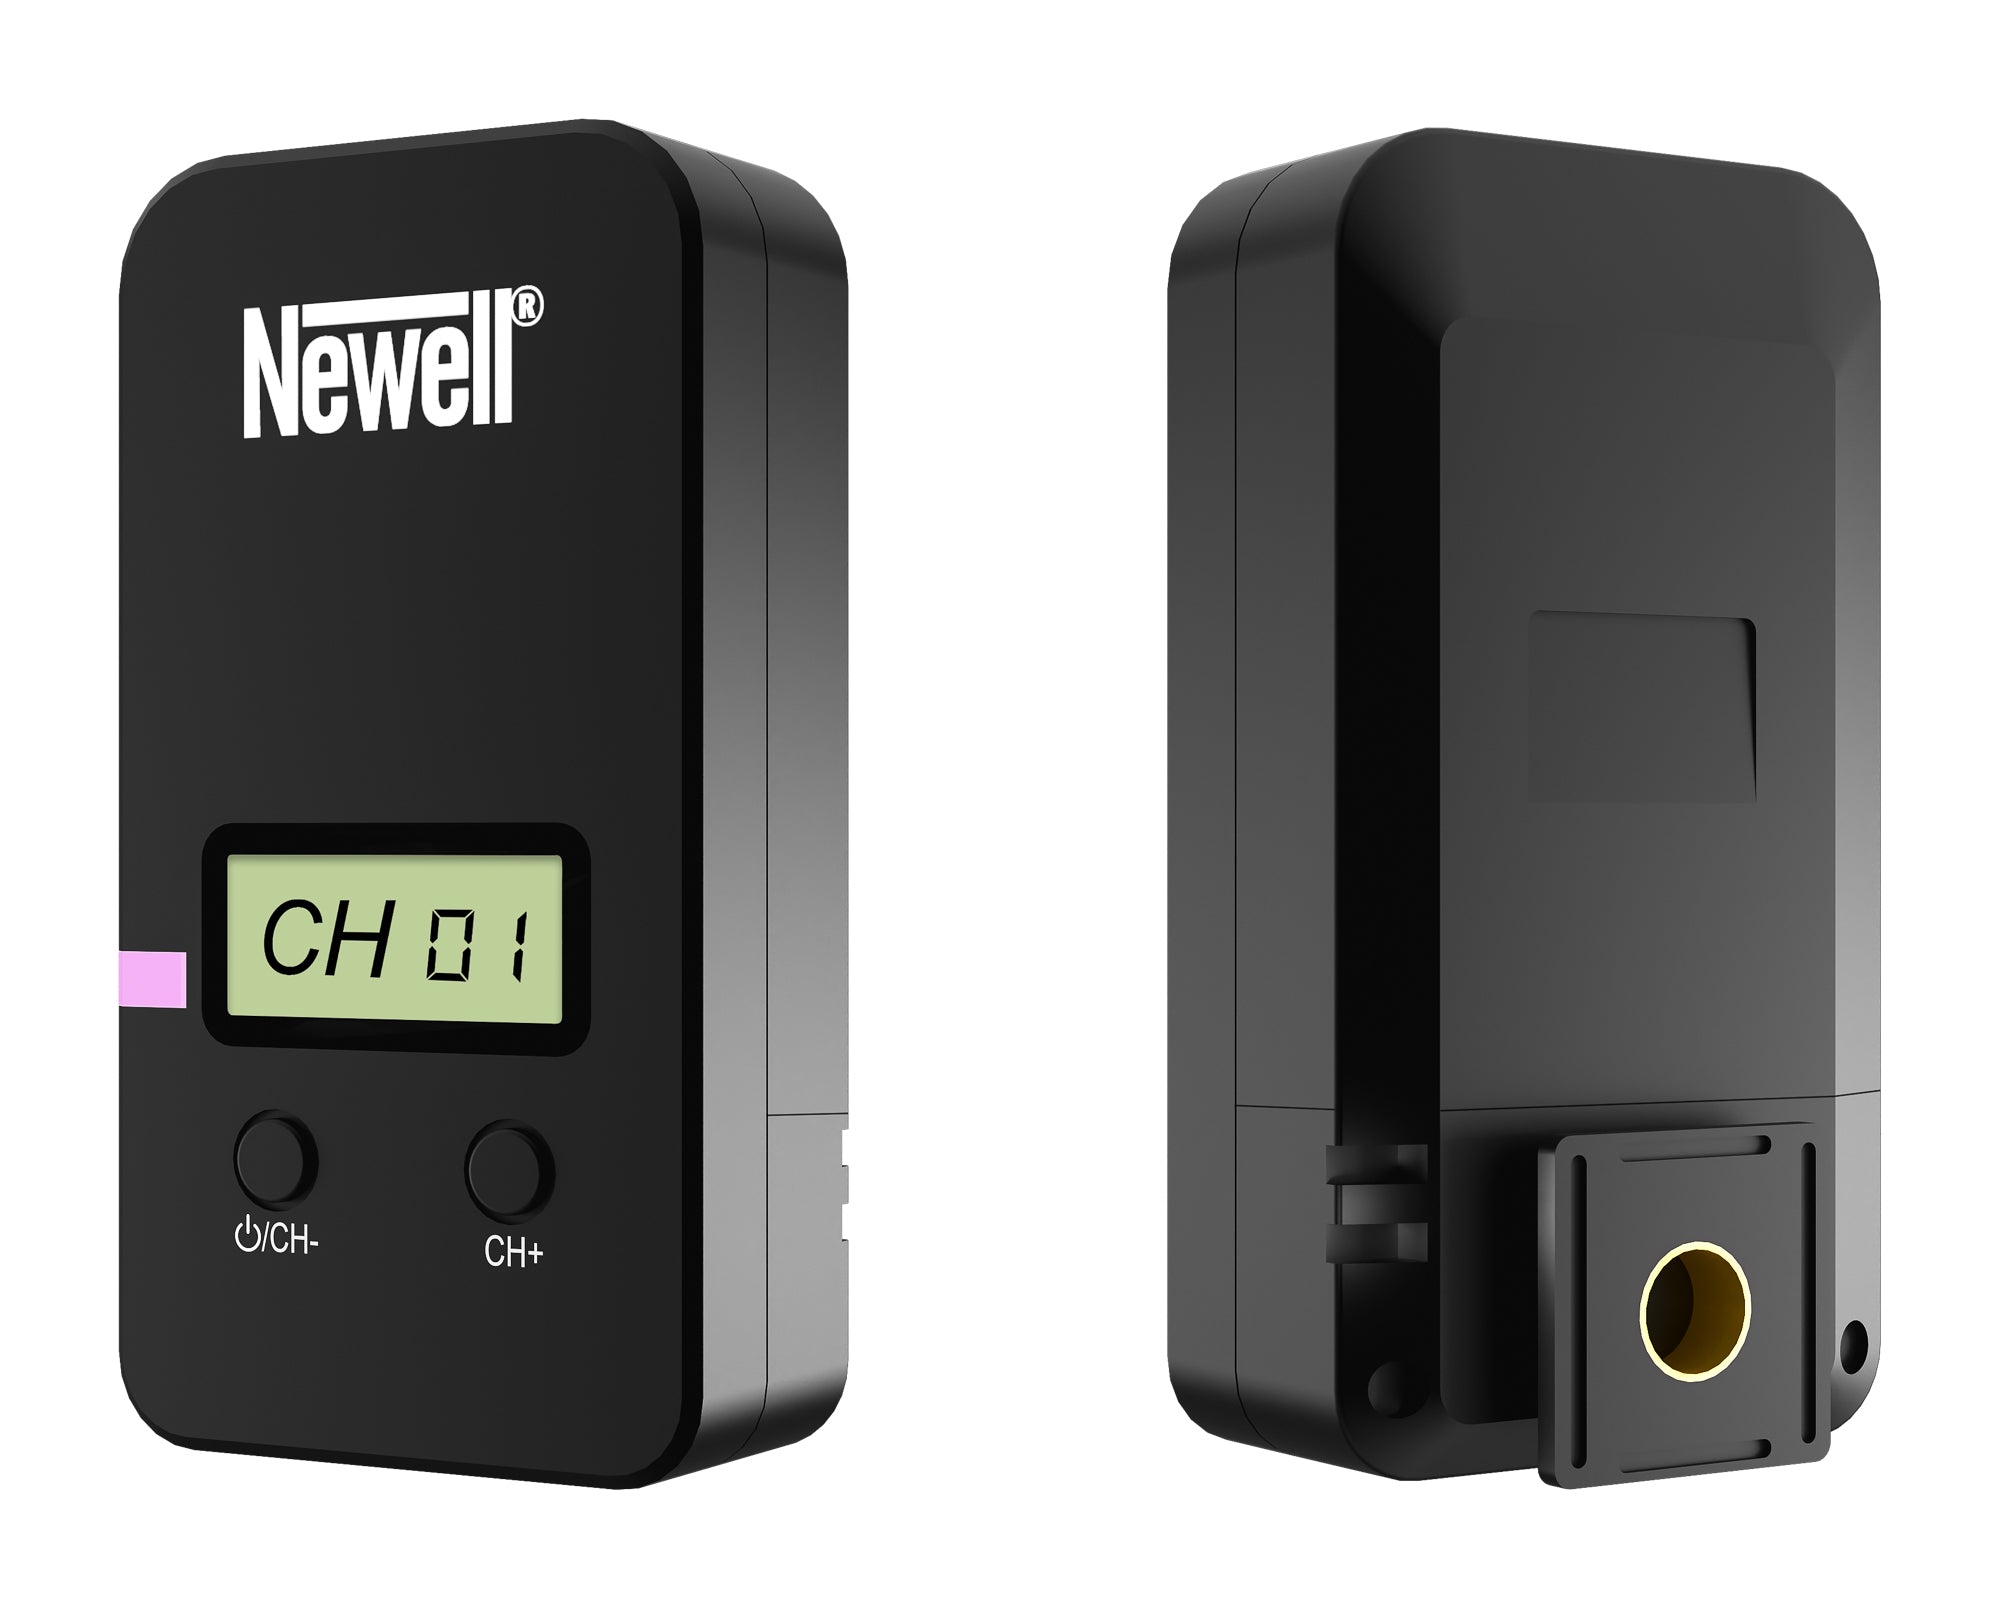 Newell wireless remote control with intervalometer for Nikon